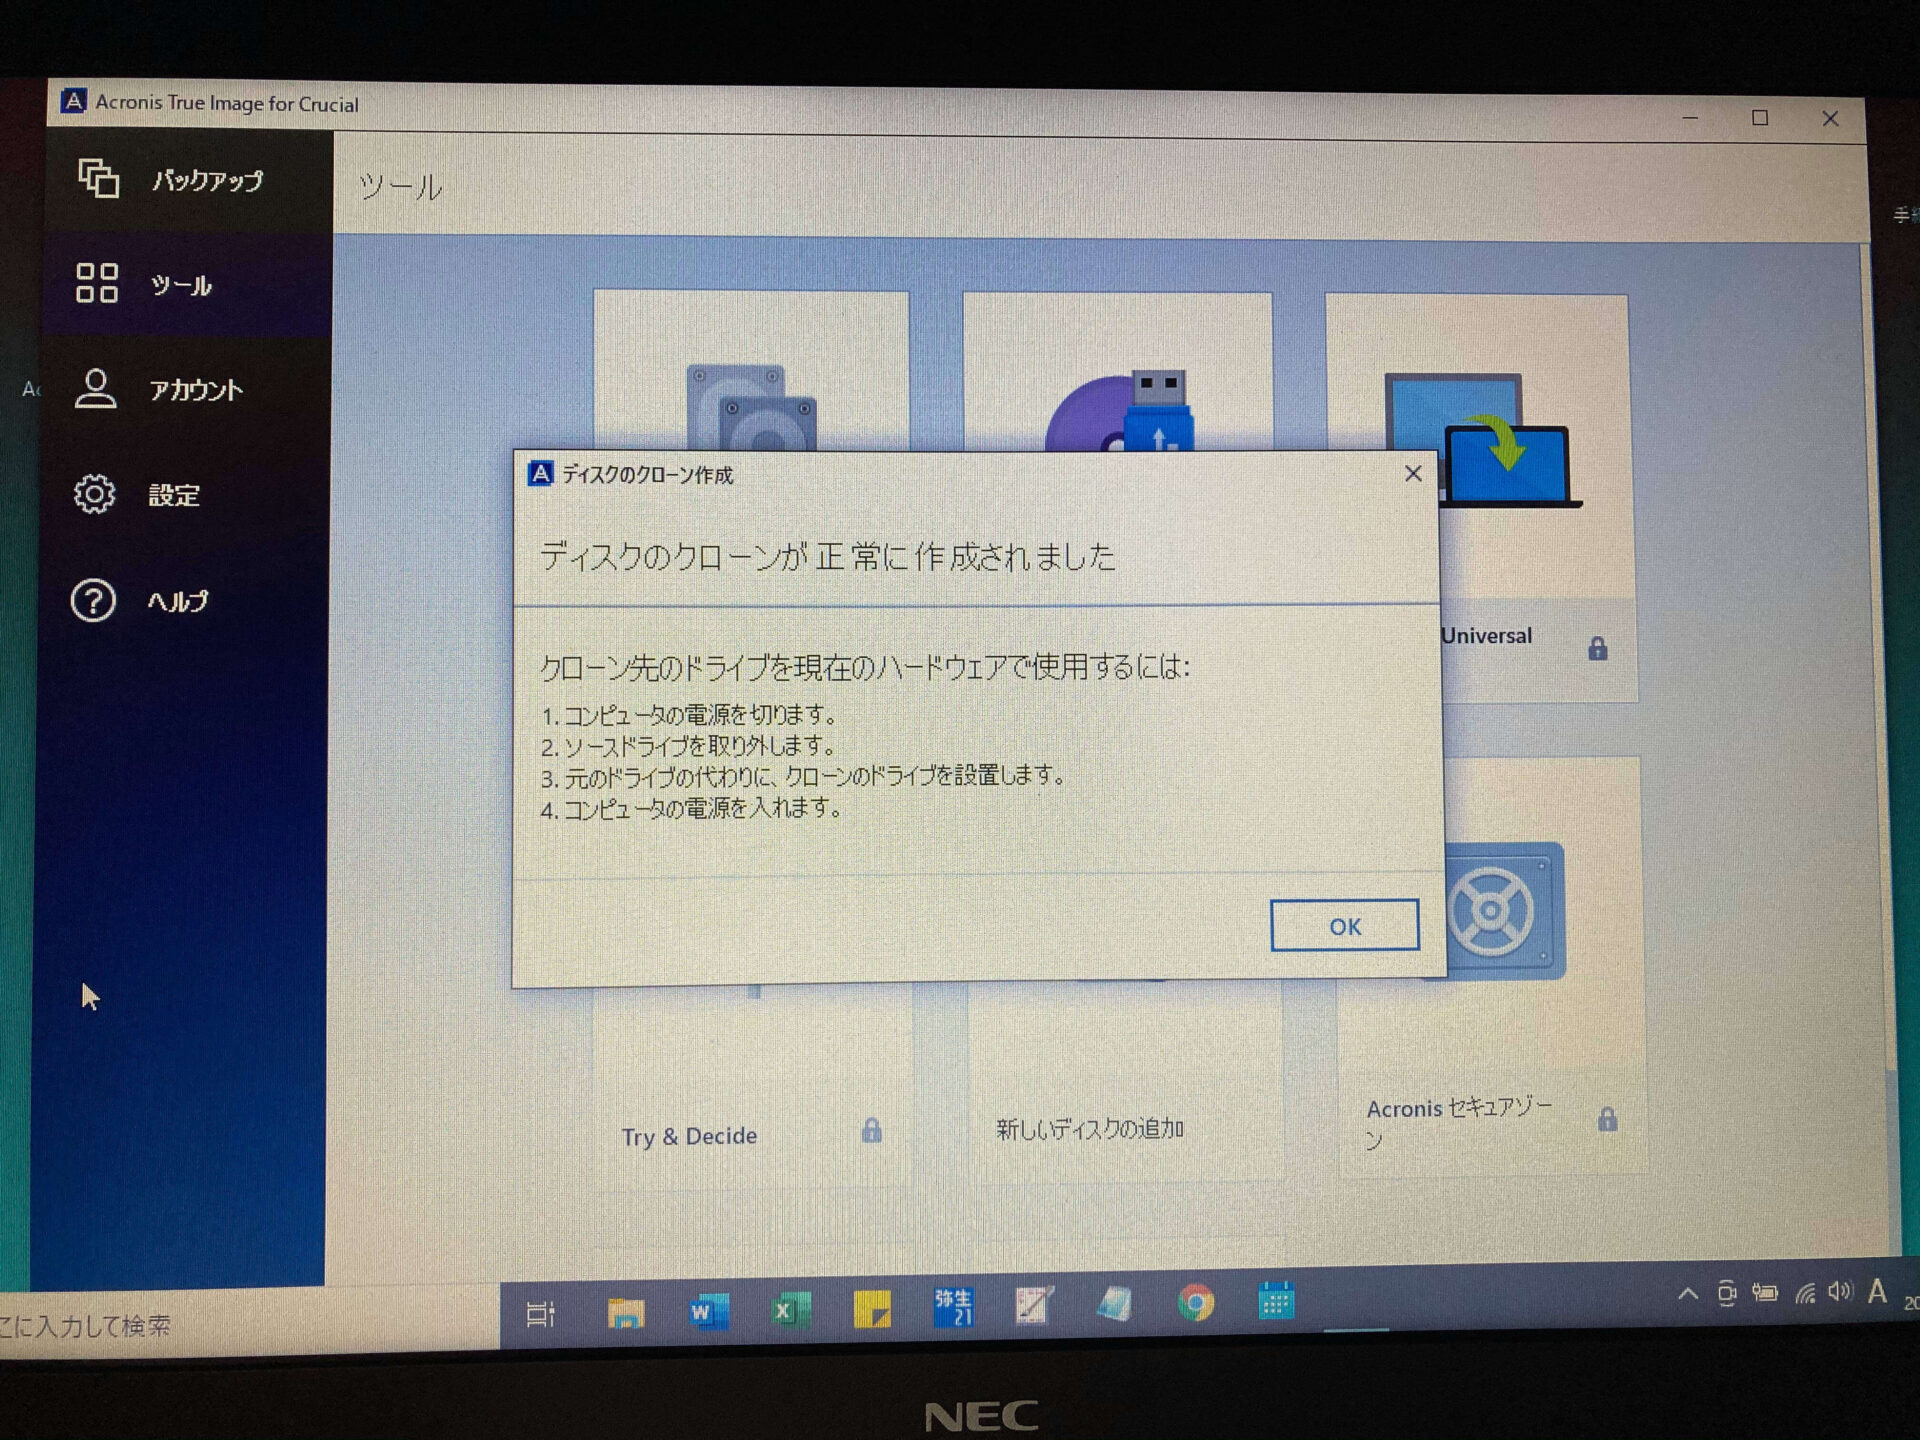 acronis true image for crucial installation failed